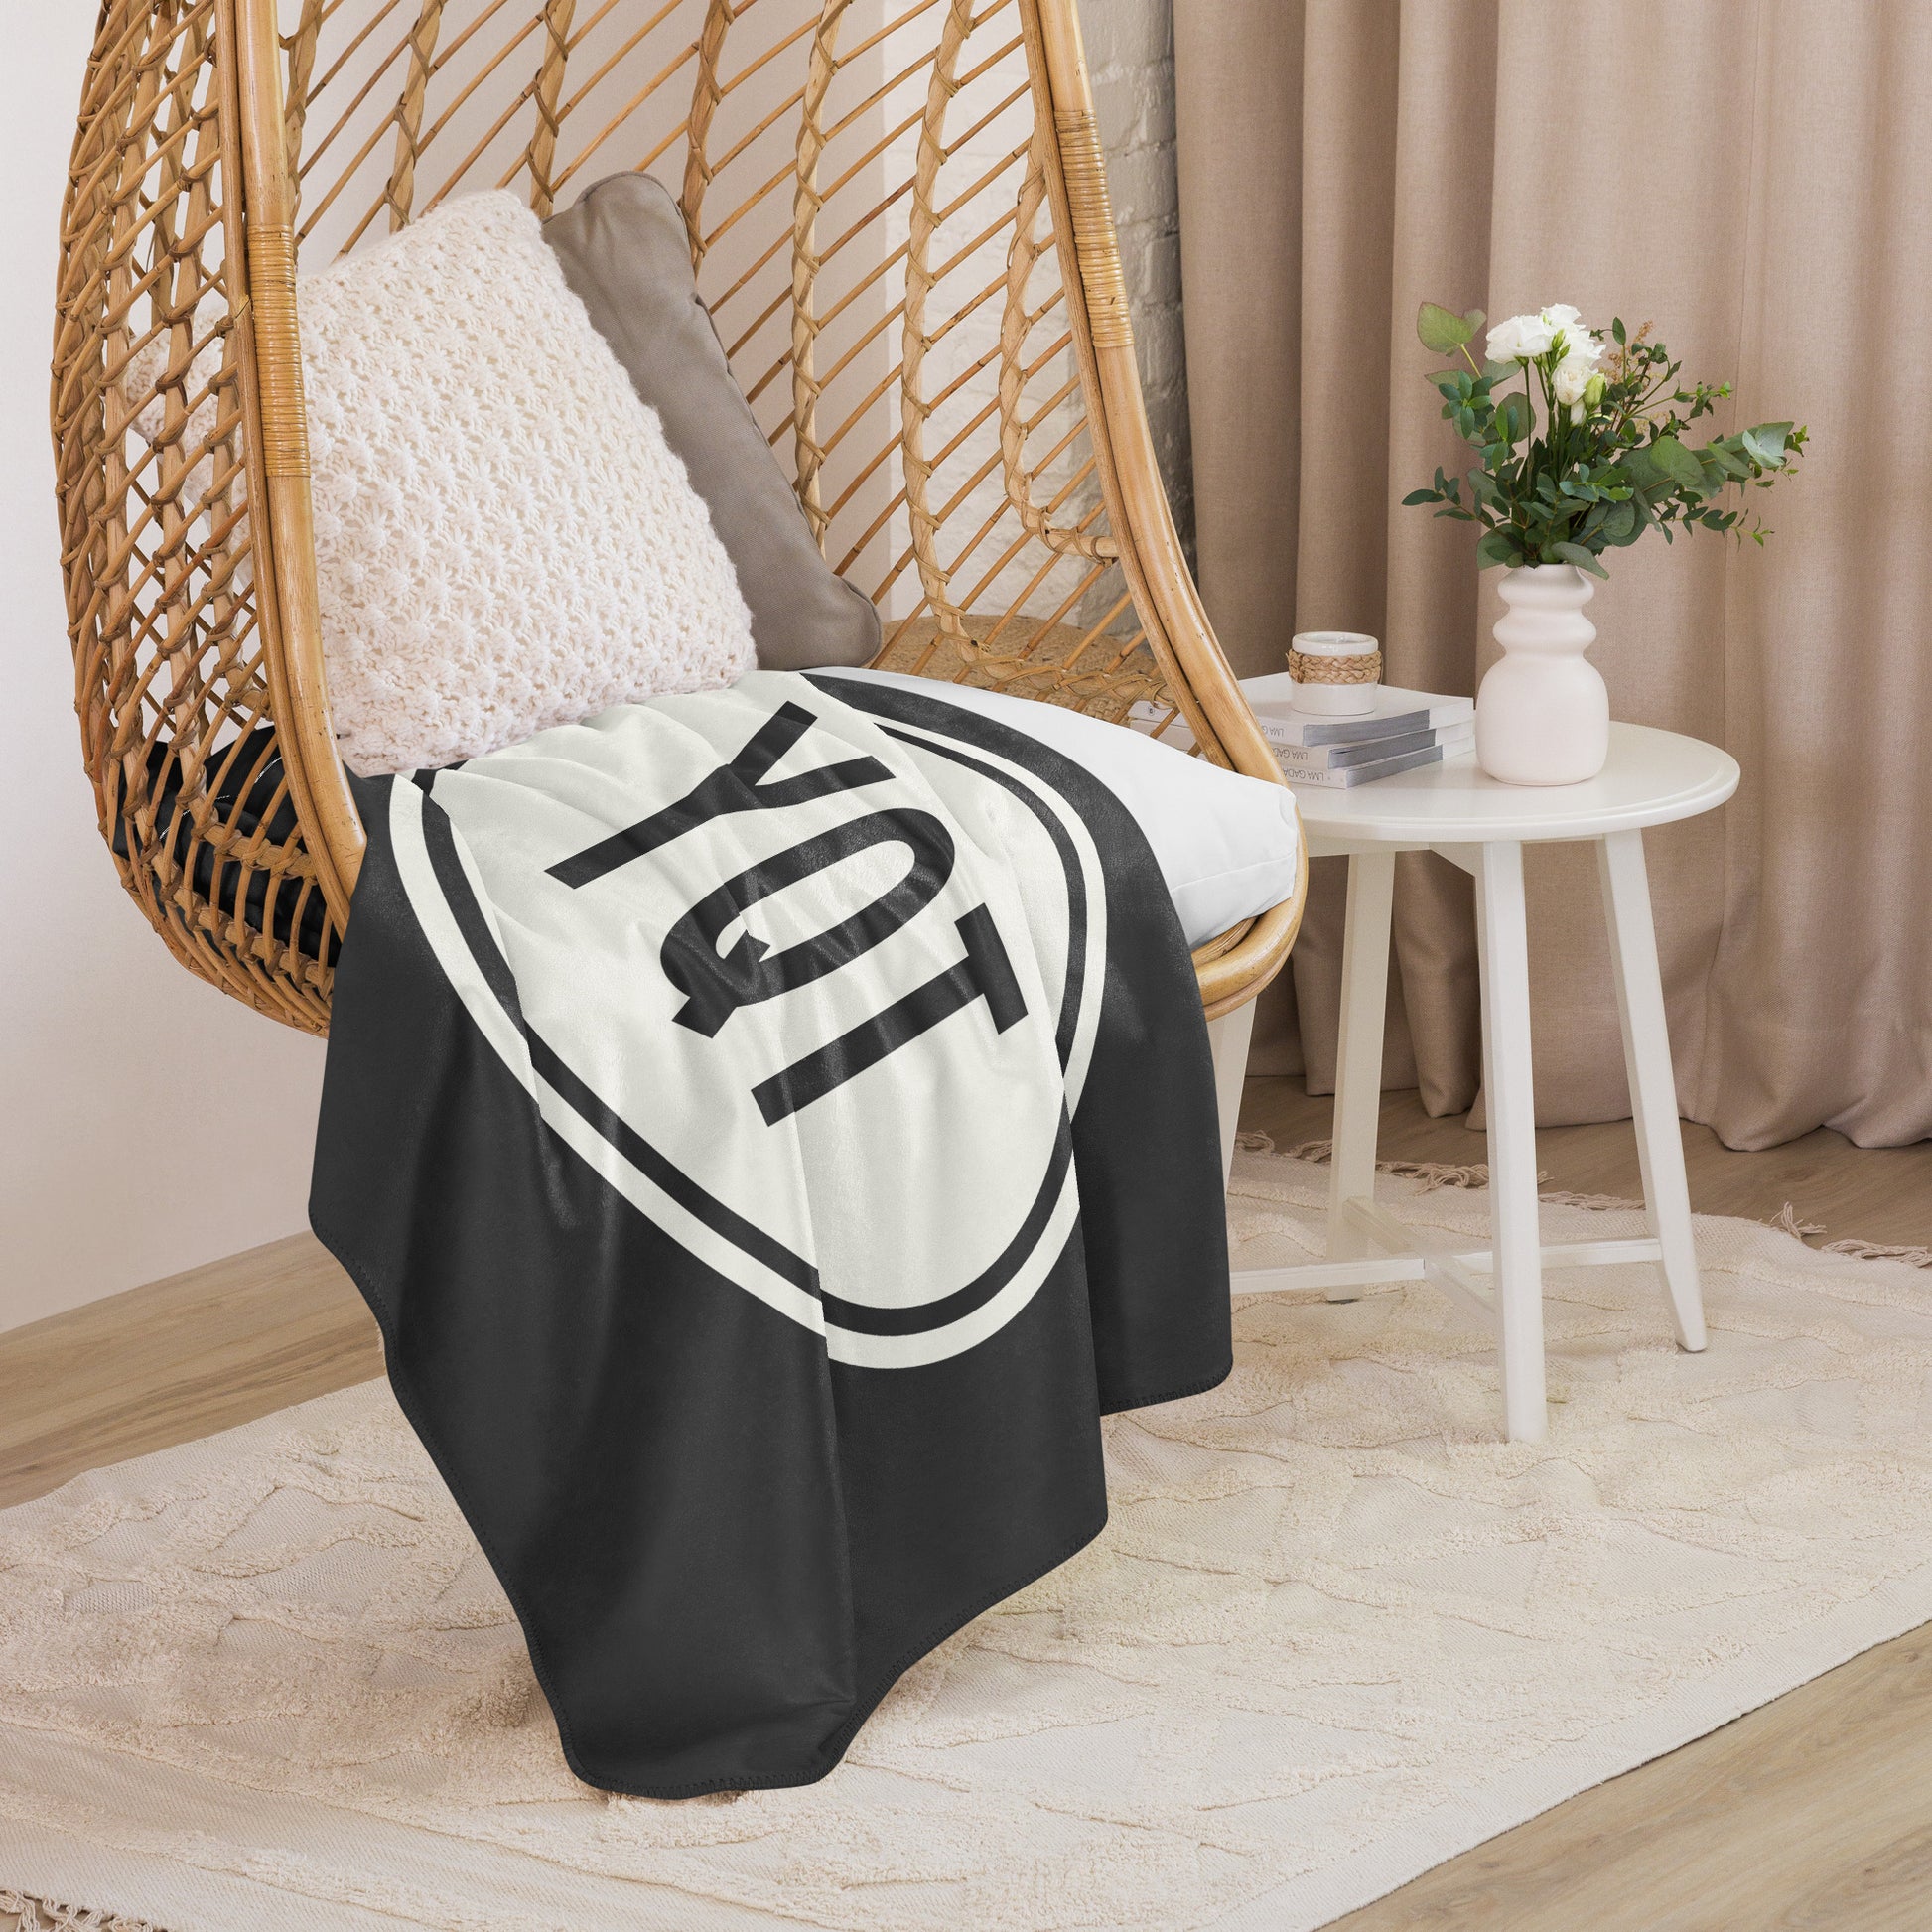 Unique Travel Gift Sherpa Blanket - White Oval • YQT Thunder Bay • YHM Designs - Image 06